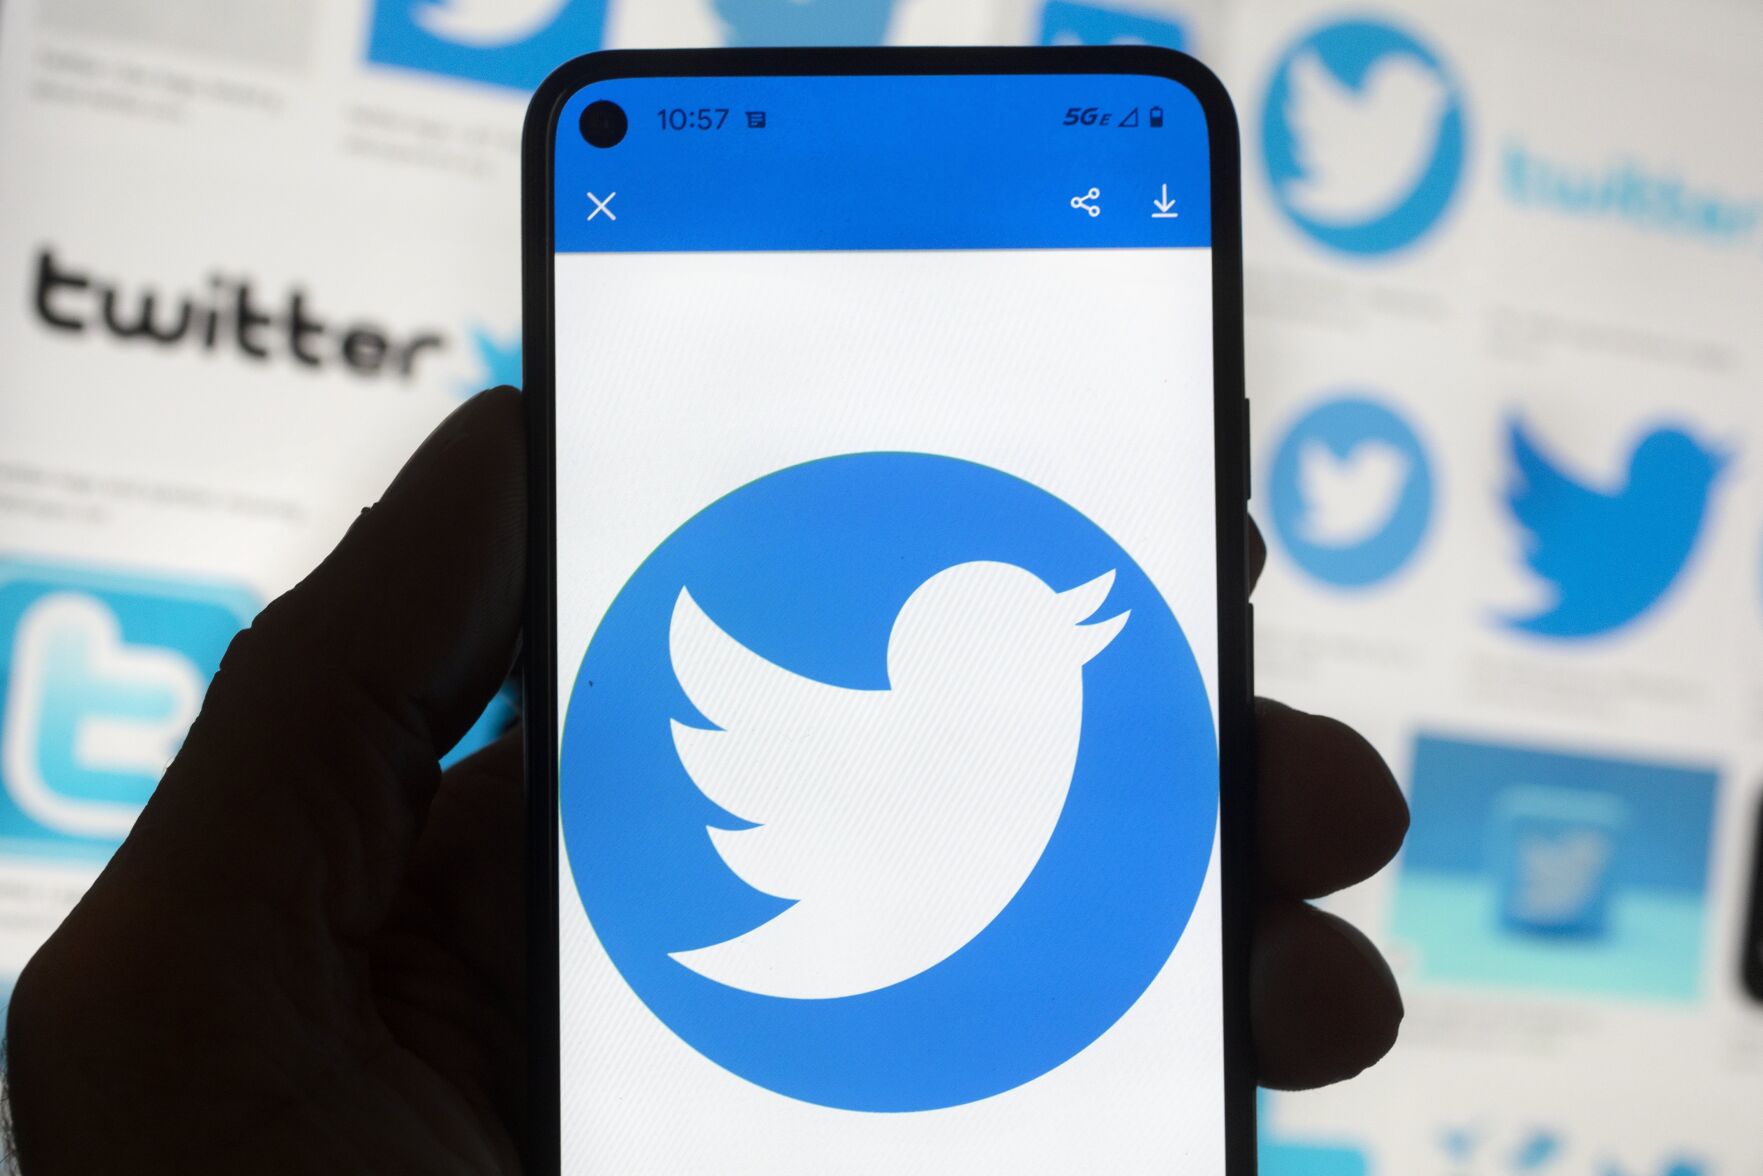 <p>The Twitter logo is seen on a cell phone, Friday, Oct. 14, 2022, in Boston. While amount of chaos is expected after a corporate takeover, as are layoffs and firings, Elon Musk’s murky plans for Twitter — especially its content moderation, misinformation and hate speech policies — are raising alarms about where one of the world’s most high-profile information ecosystems is headed. (AP Photo/Michael Dwyer)</p>   PHOTO CREDIT: Michael Dwyer - staff, AP